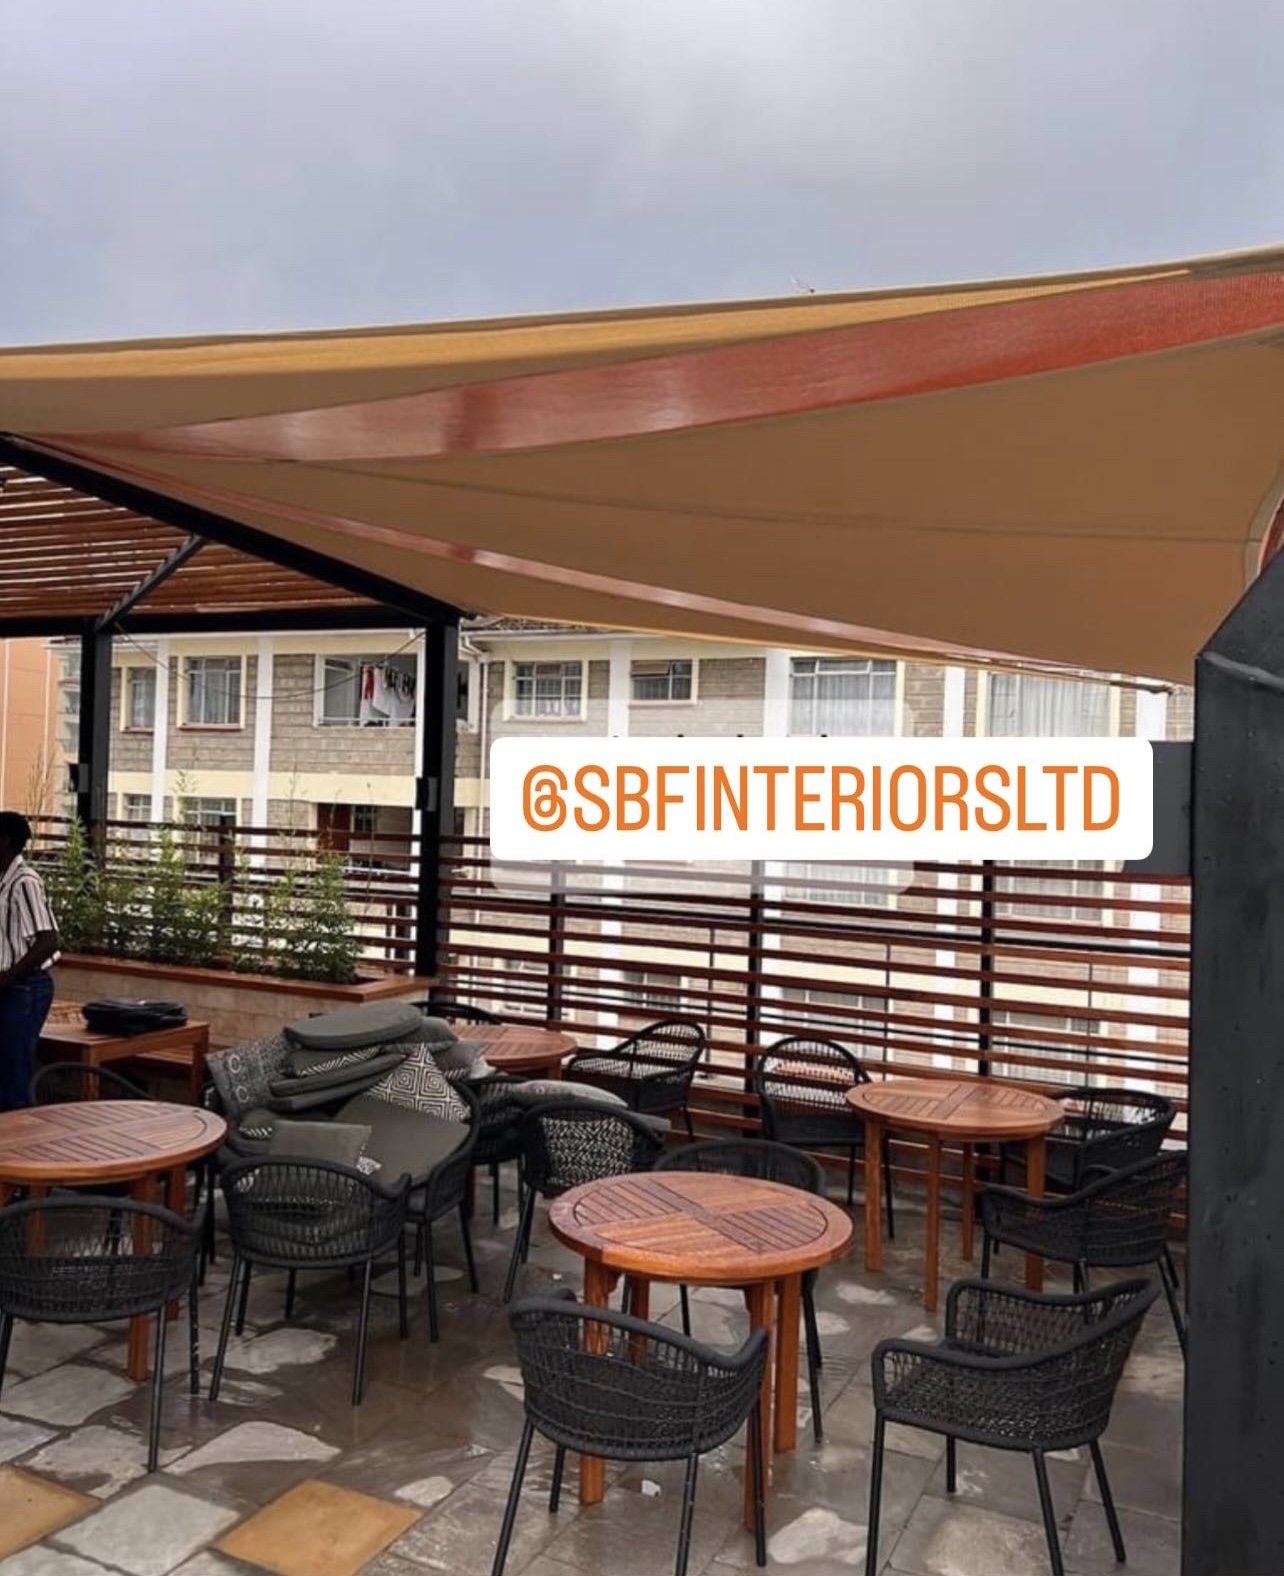 Unique and Modern Shade Sail Installer and Fabricator in DAYKIO BUSTANI ESTATE Ruiru Kenya -Commercial and Residential Shades-Creative Canvas Shades-Sun Shades-Waterproof Shade cloth and Shade Net Cover-Square Sail-Triangle Sail-Rectangle Sail-Tensile Structures-Shades for Sports Stadiums-Shades for Restaurants-Alfresco Dining Shades-Shades for Clubs and Bars-Shades for Hotels-Shades for Resorts-Shades for outdoor Dining Spaces-Shades for Barbeque Barbecue Areas-Shades for Roof Decks-Terrace Sun shades-Shades for Rooftop Areas-Shades for Garden and Yards-Shades for Offices and Homes-Patio Shade-Balcony Shade-Porches Shade-Veranda Shade-Shades for Shops-Malls-Shopping Centers-Schools-Playground Areas-Pool Area-Hospitals-Churches-Airport-Embassy-University-College-Stretch Tents-